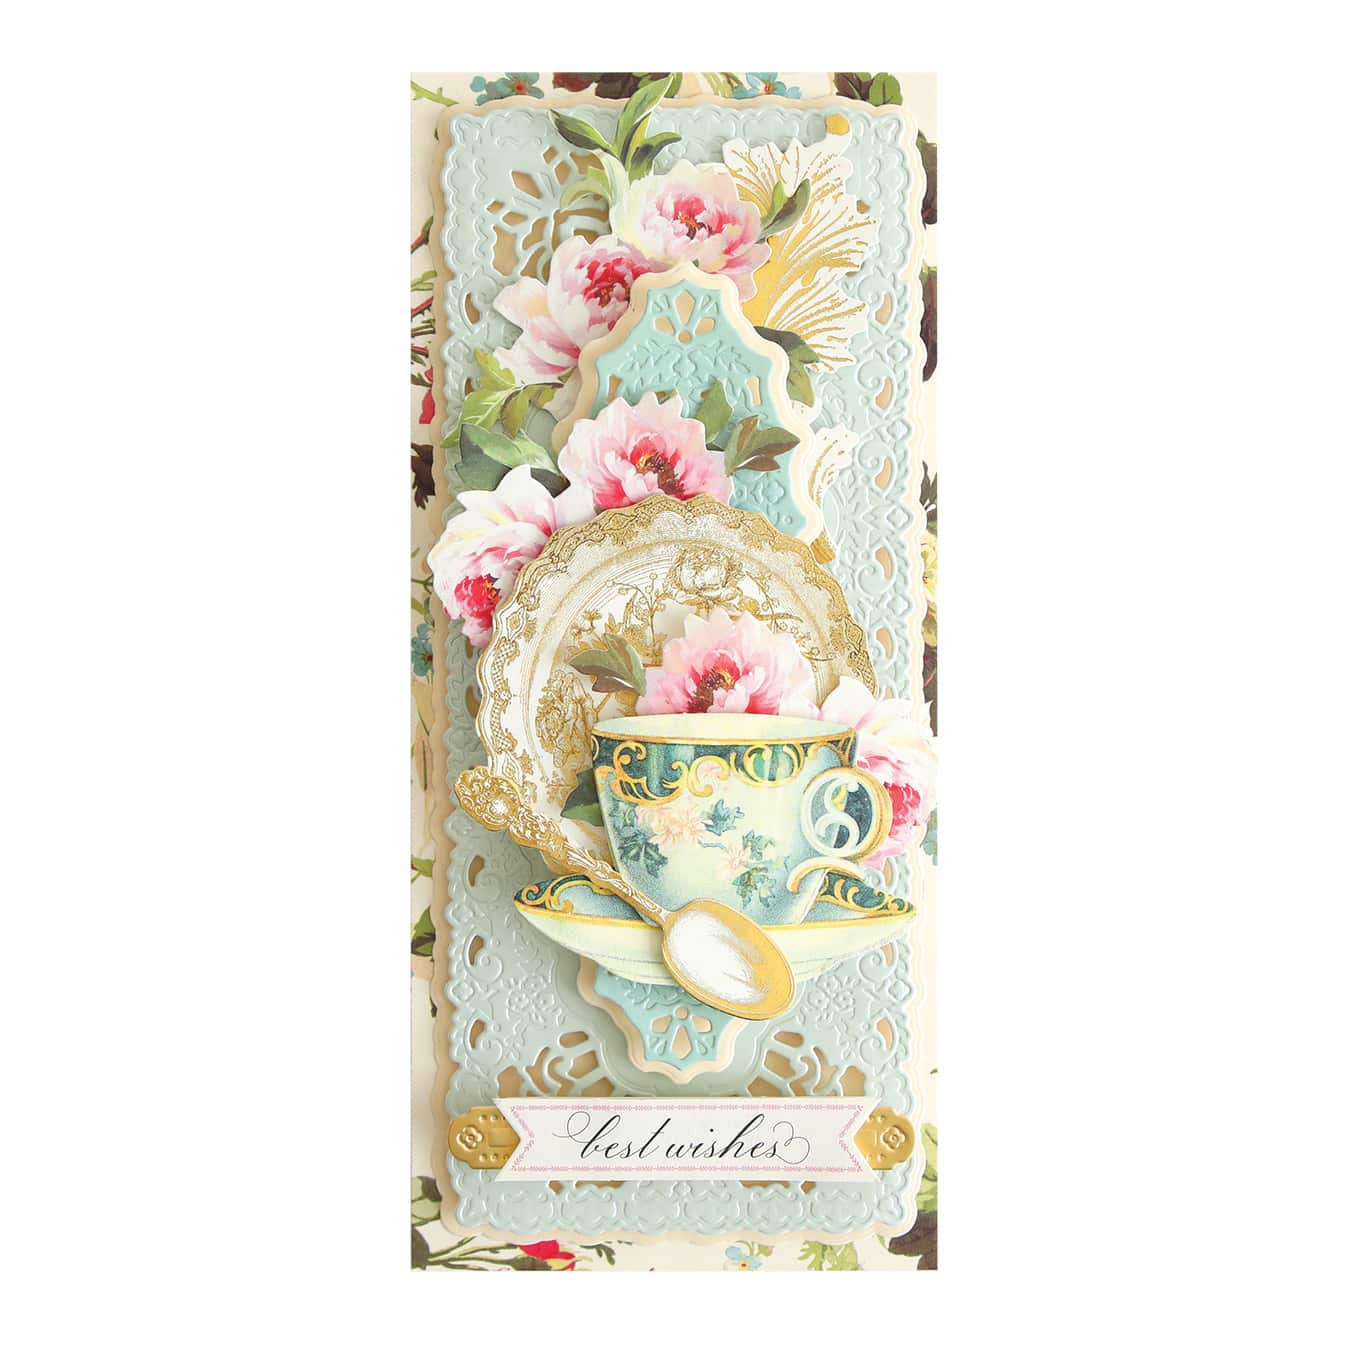 A card with a tea cup and flowers.